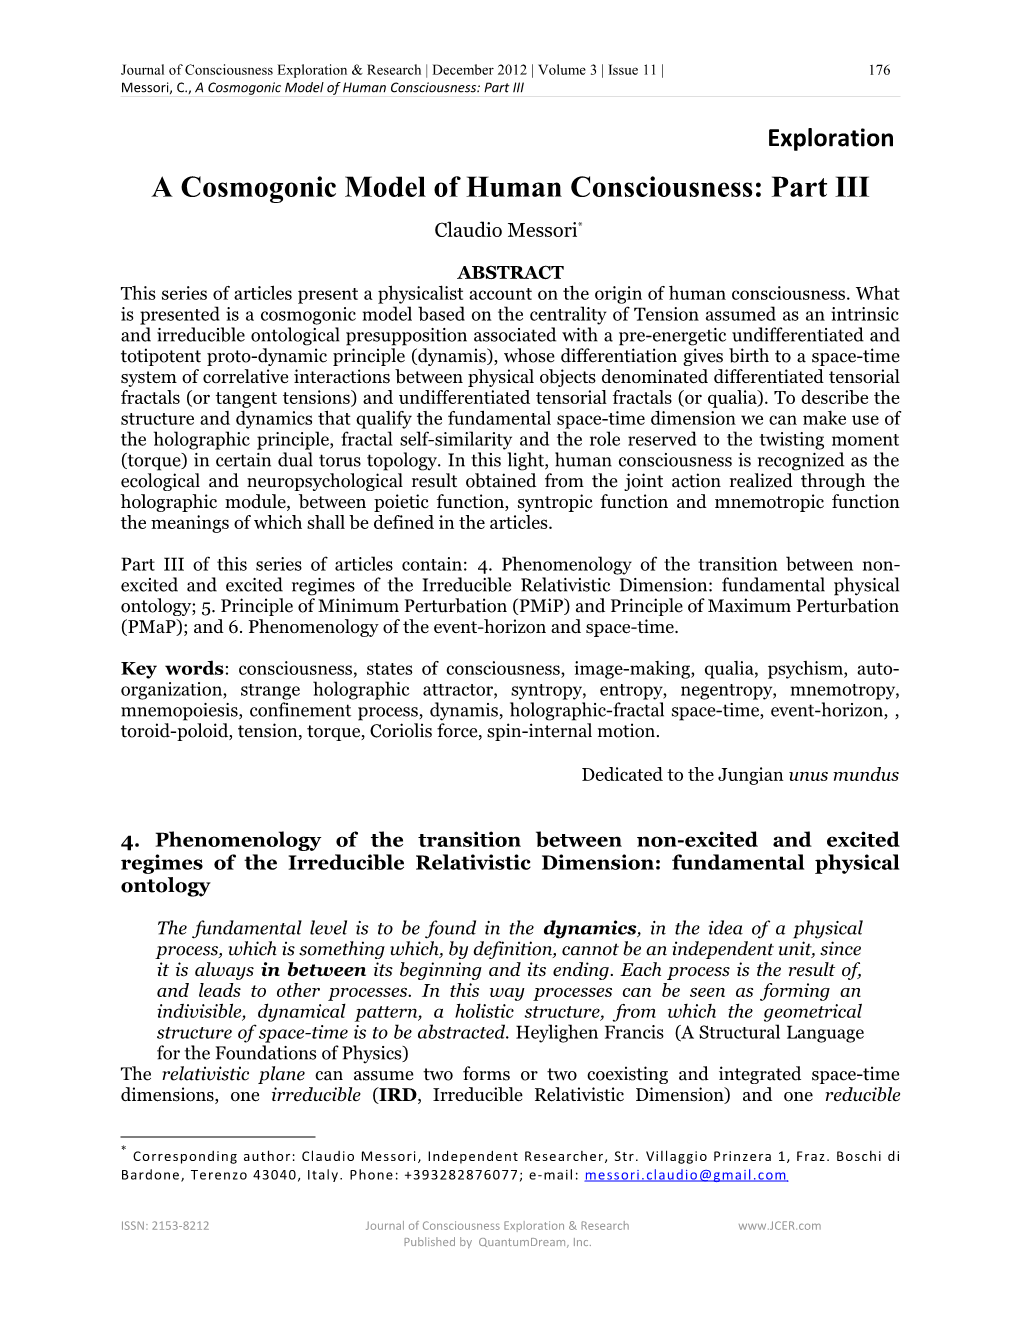 A Cosmogonic Model of Human Consciousness: Part III